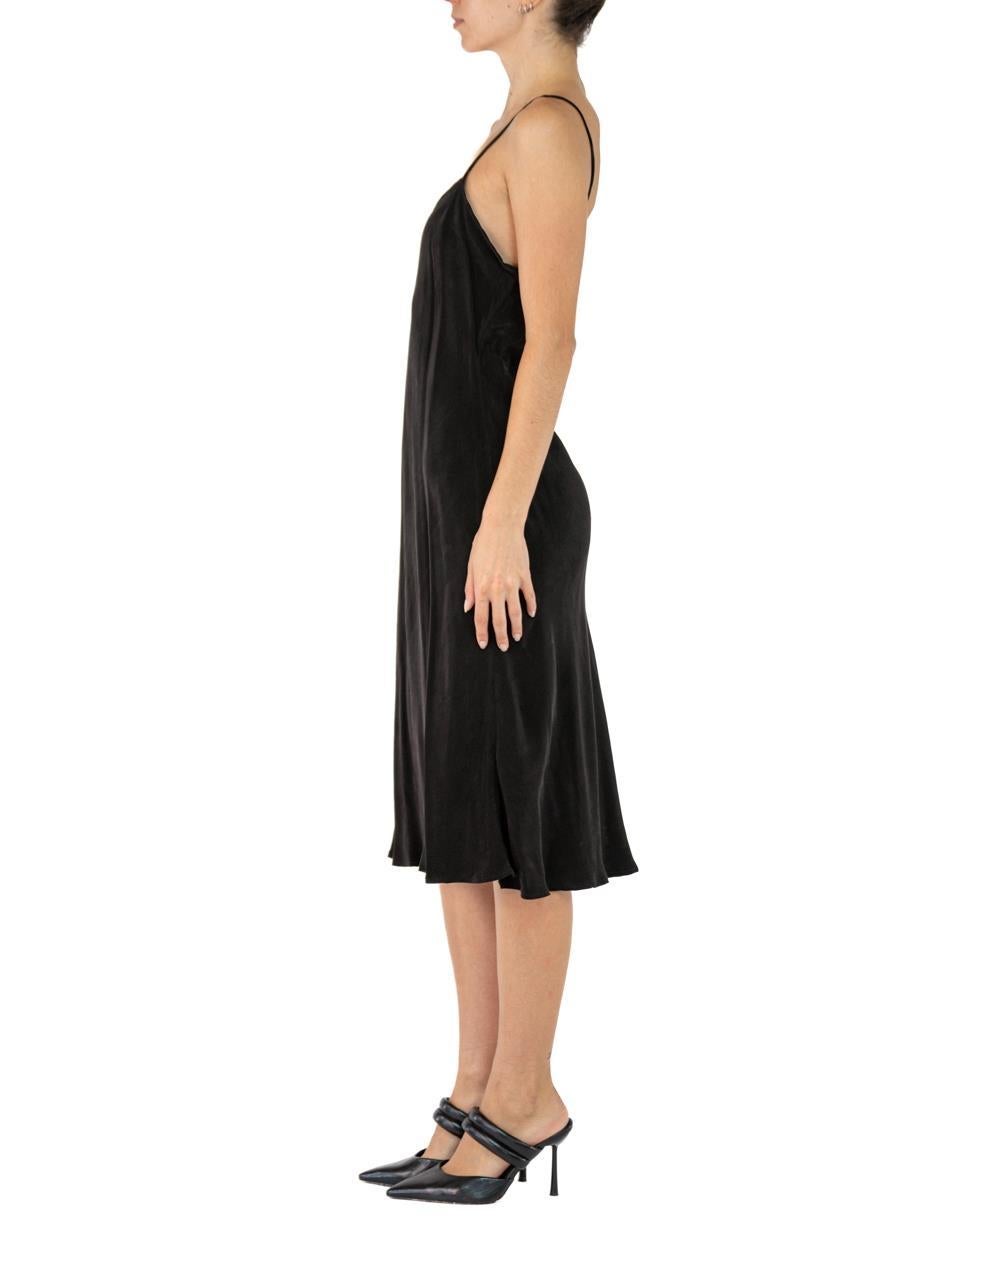 Morphew Collection Black Cold Rayon Bias Maxi Slip Dress Master Medium
MORPHEW COLLECTION is made entirely by hand in our NYC Ateliér of rare antique materials sourced from around the globe. Our sustainable vintage materials represent over a century